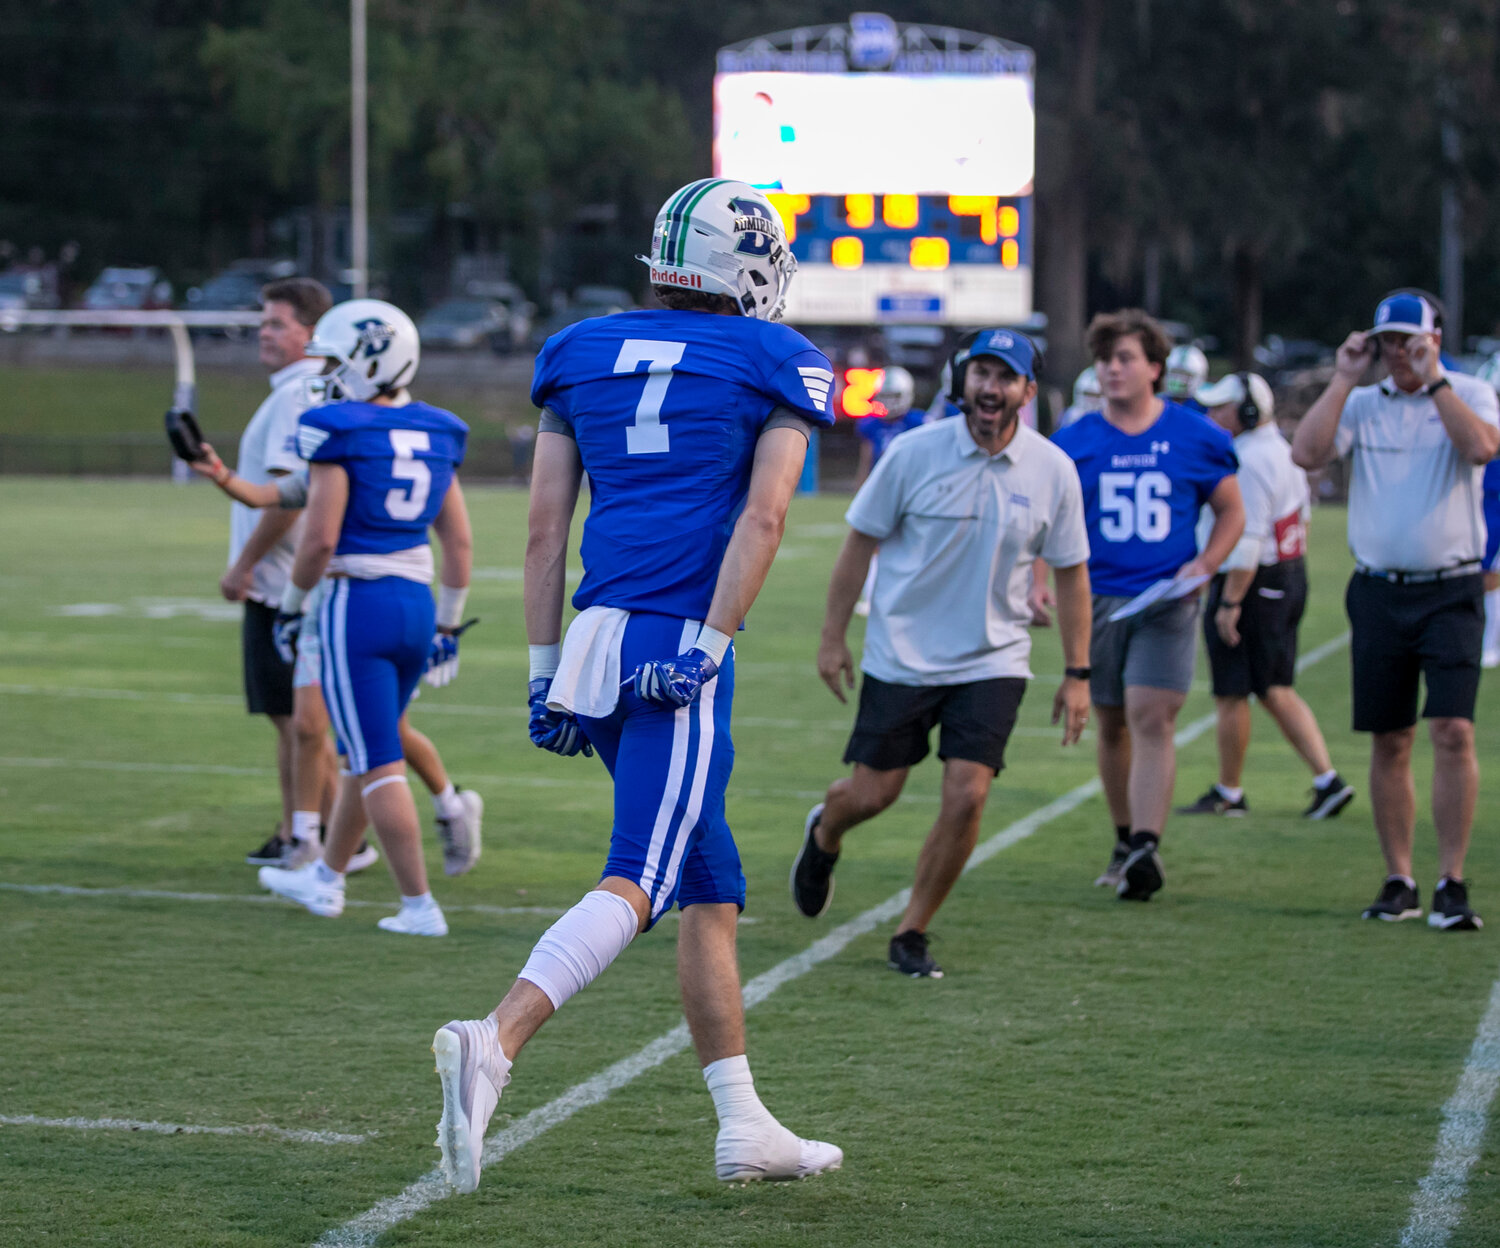 Bayside Academy senior Tait Moore returns to the sideline and is greeted by head coach Barrett Trotter after his first-quarter receiving touchdown against Elberta in the Admirals’ regular-season opener Friday night at home.